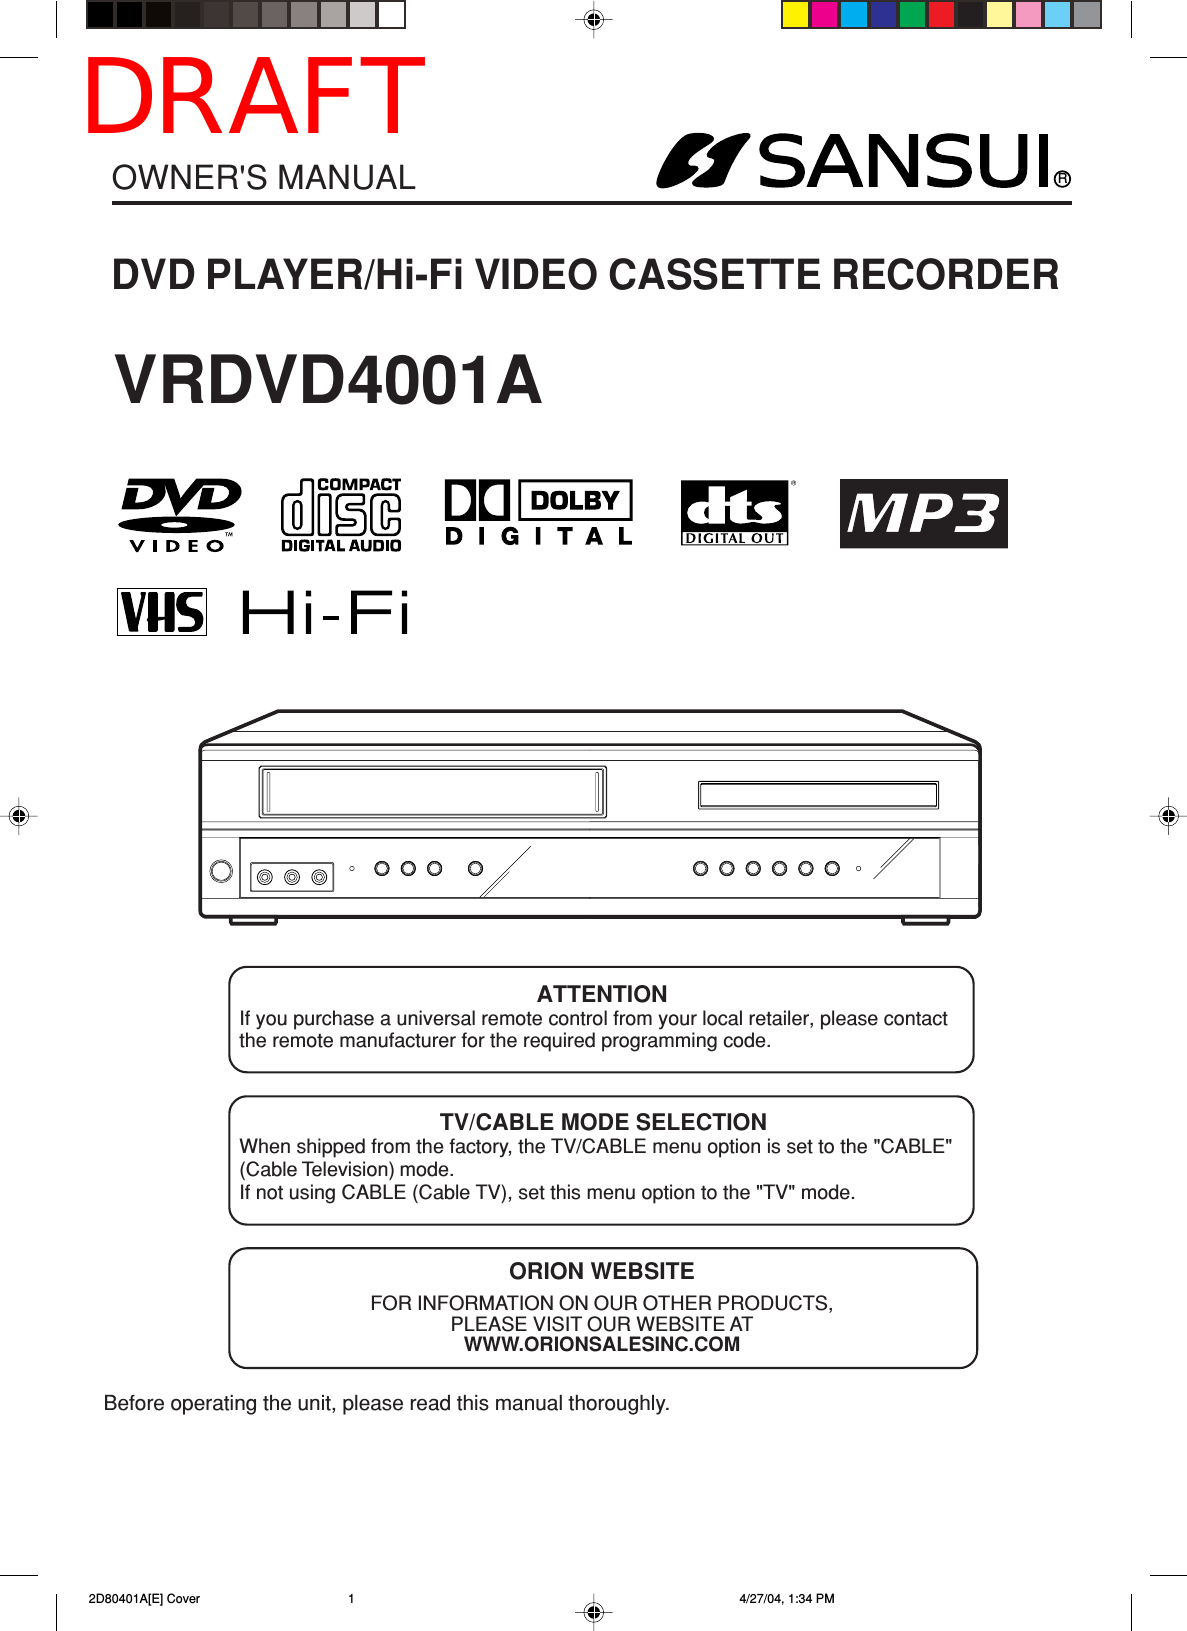 RDVD PLAYER/Hi-Fi VIDEO CASSETTE RECORDEROWNER&apos;S MANUALBefore operating the unit, please read this manual thoroughly.ATTENTIONIf you purchase a universal remote control from your local retailer, please contactthe remote manufacturer for the required programming code.TV/CABLE MODE SELECTIONWhen shipped from the factory, the TV/CABLE menu option is set to the &quot;CABLE&quot;(Cable Television) mode.If not using CABLE (Cable TV), set this menu option to the &quot;TV&quot; mode.ORION WEBSITEFOR INFORMATION ON OUR OTHER PRODUCTS,PLEASE VISIT OUR WEBSITE ATWWW.ORIONSALESINC.COMVRDVD4001A 2D80401A[E] Cover 4/27/04, 1:34 PM1DRAFT